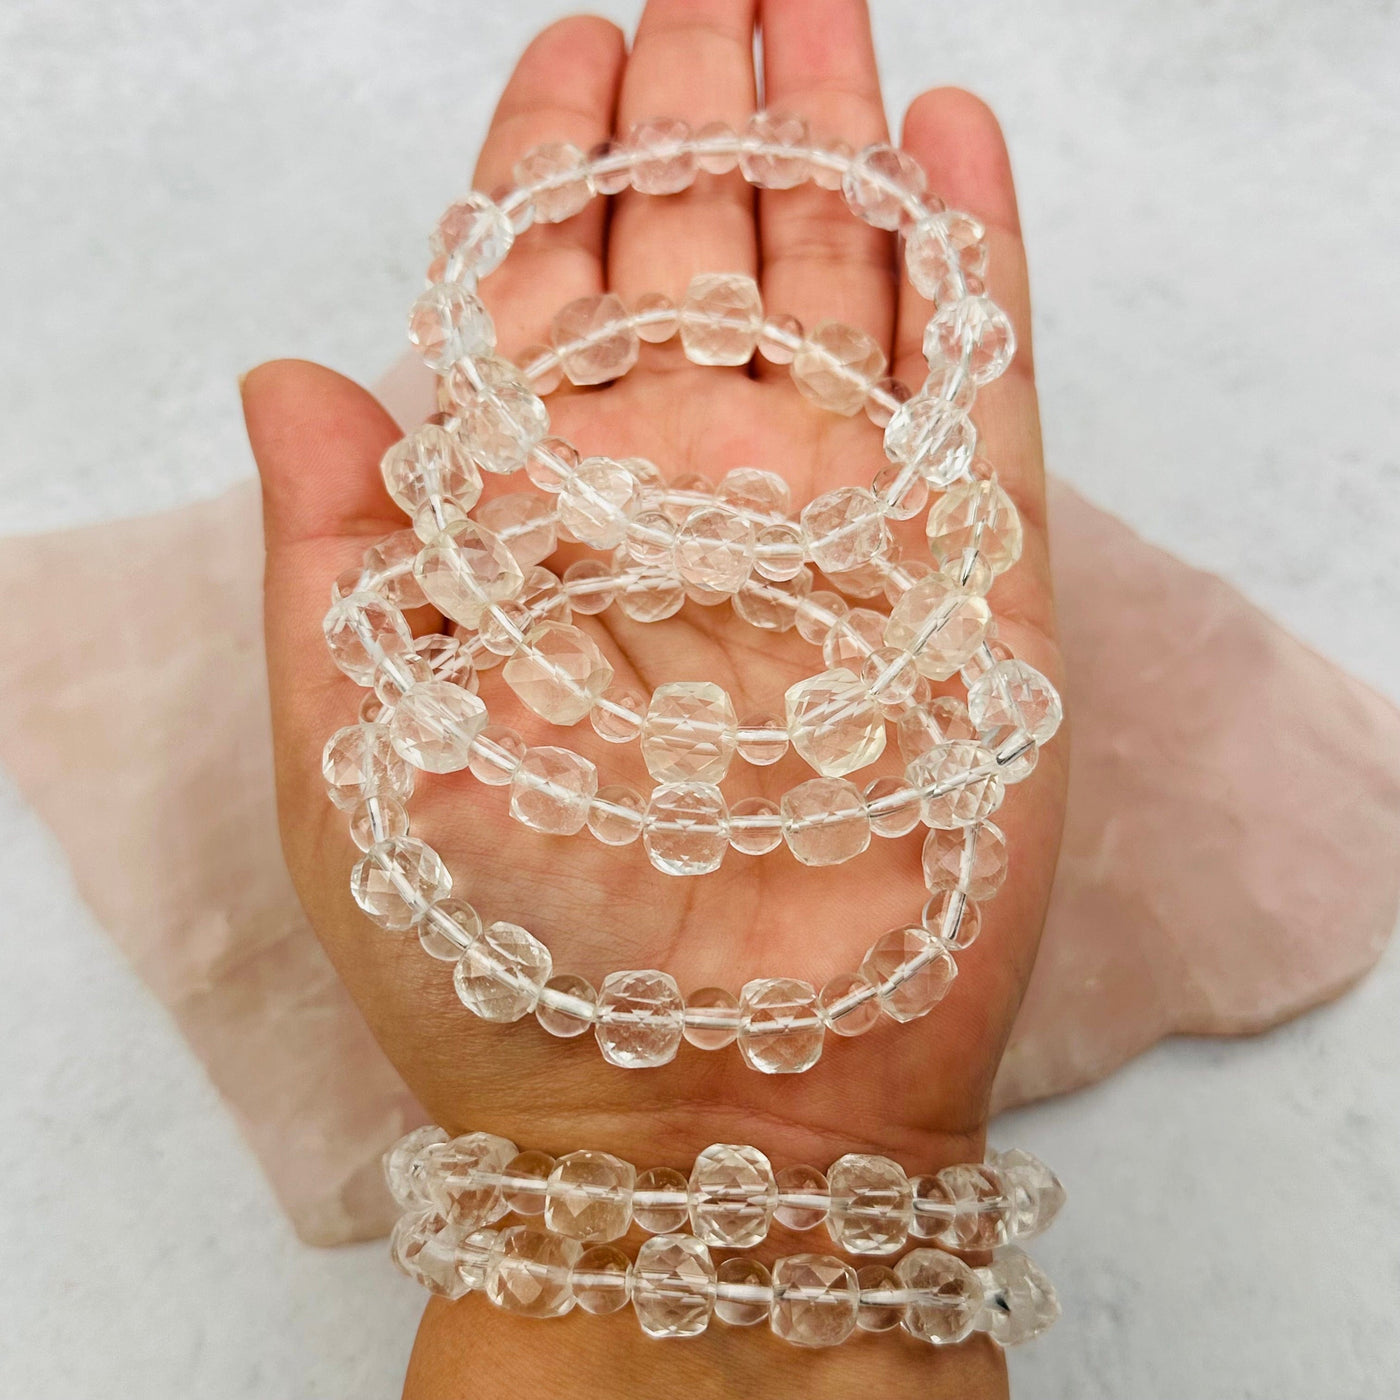 Crystal Quartz Faceted Bead Bracelets in hand for size reference 